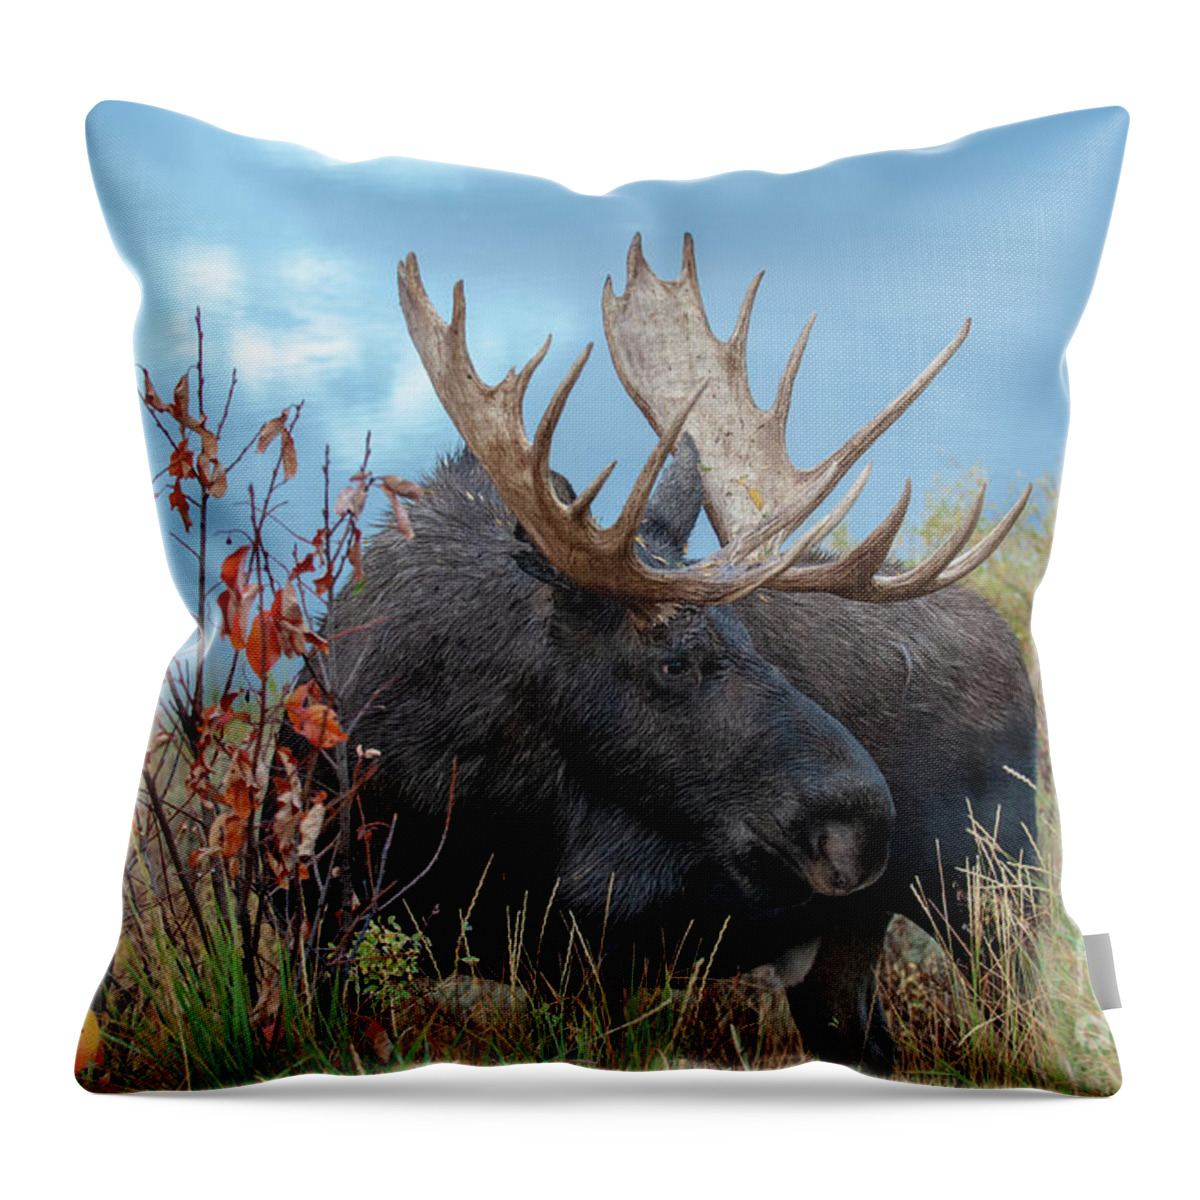 Wildlife Throw Pillow featuring the photograph Keeping An Eye Out #1 by Sandra Bronstein